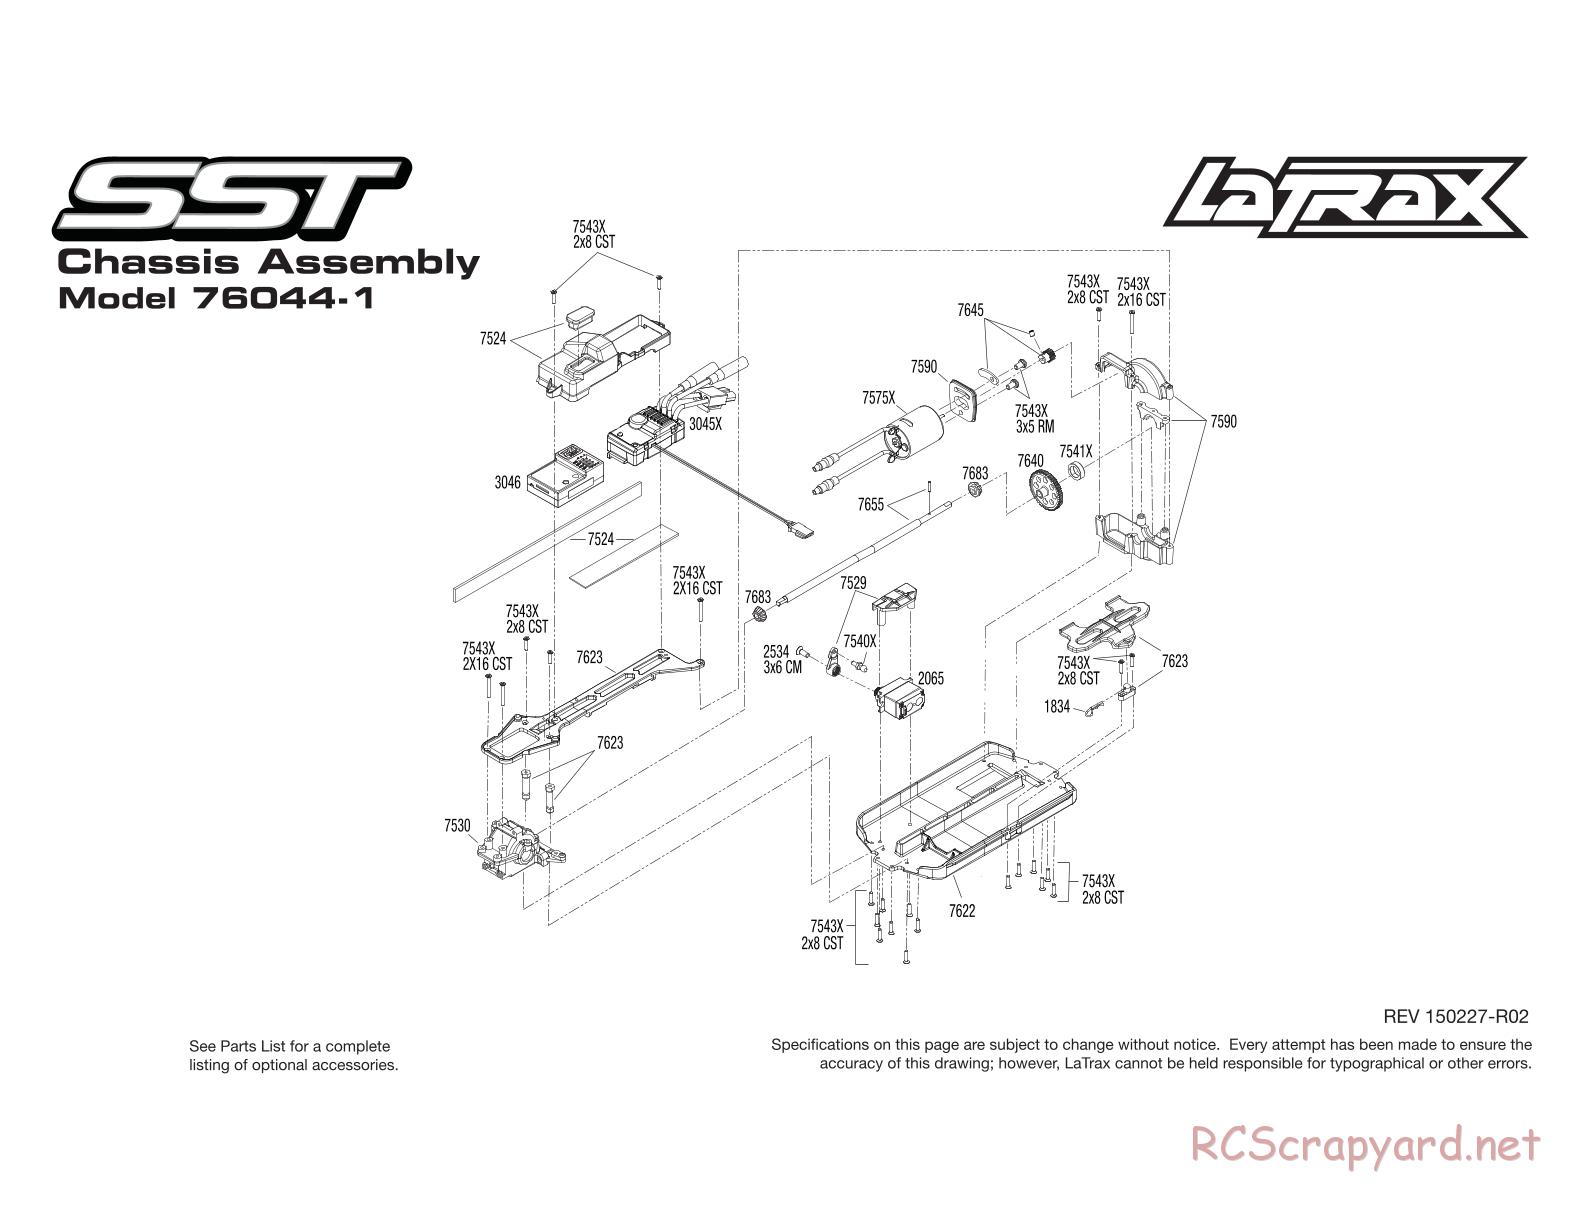 Traxxas - LaTrax SST (2014) - Exploded Views - Page 2